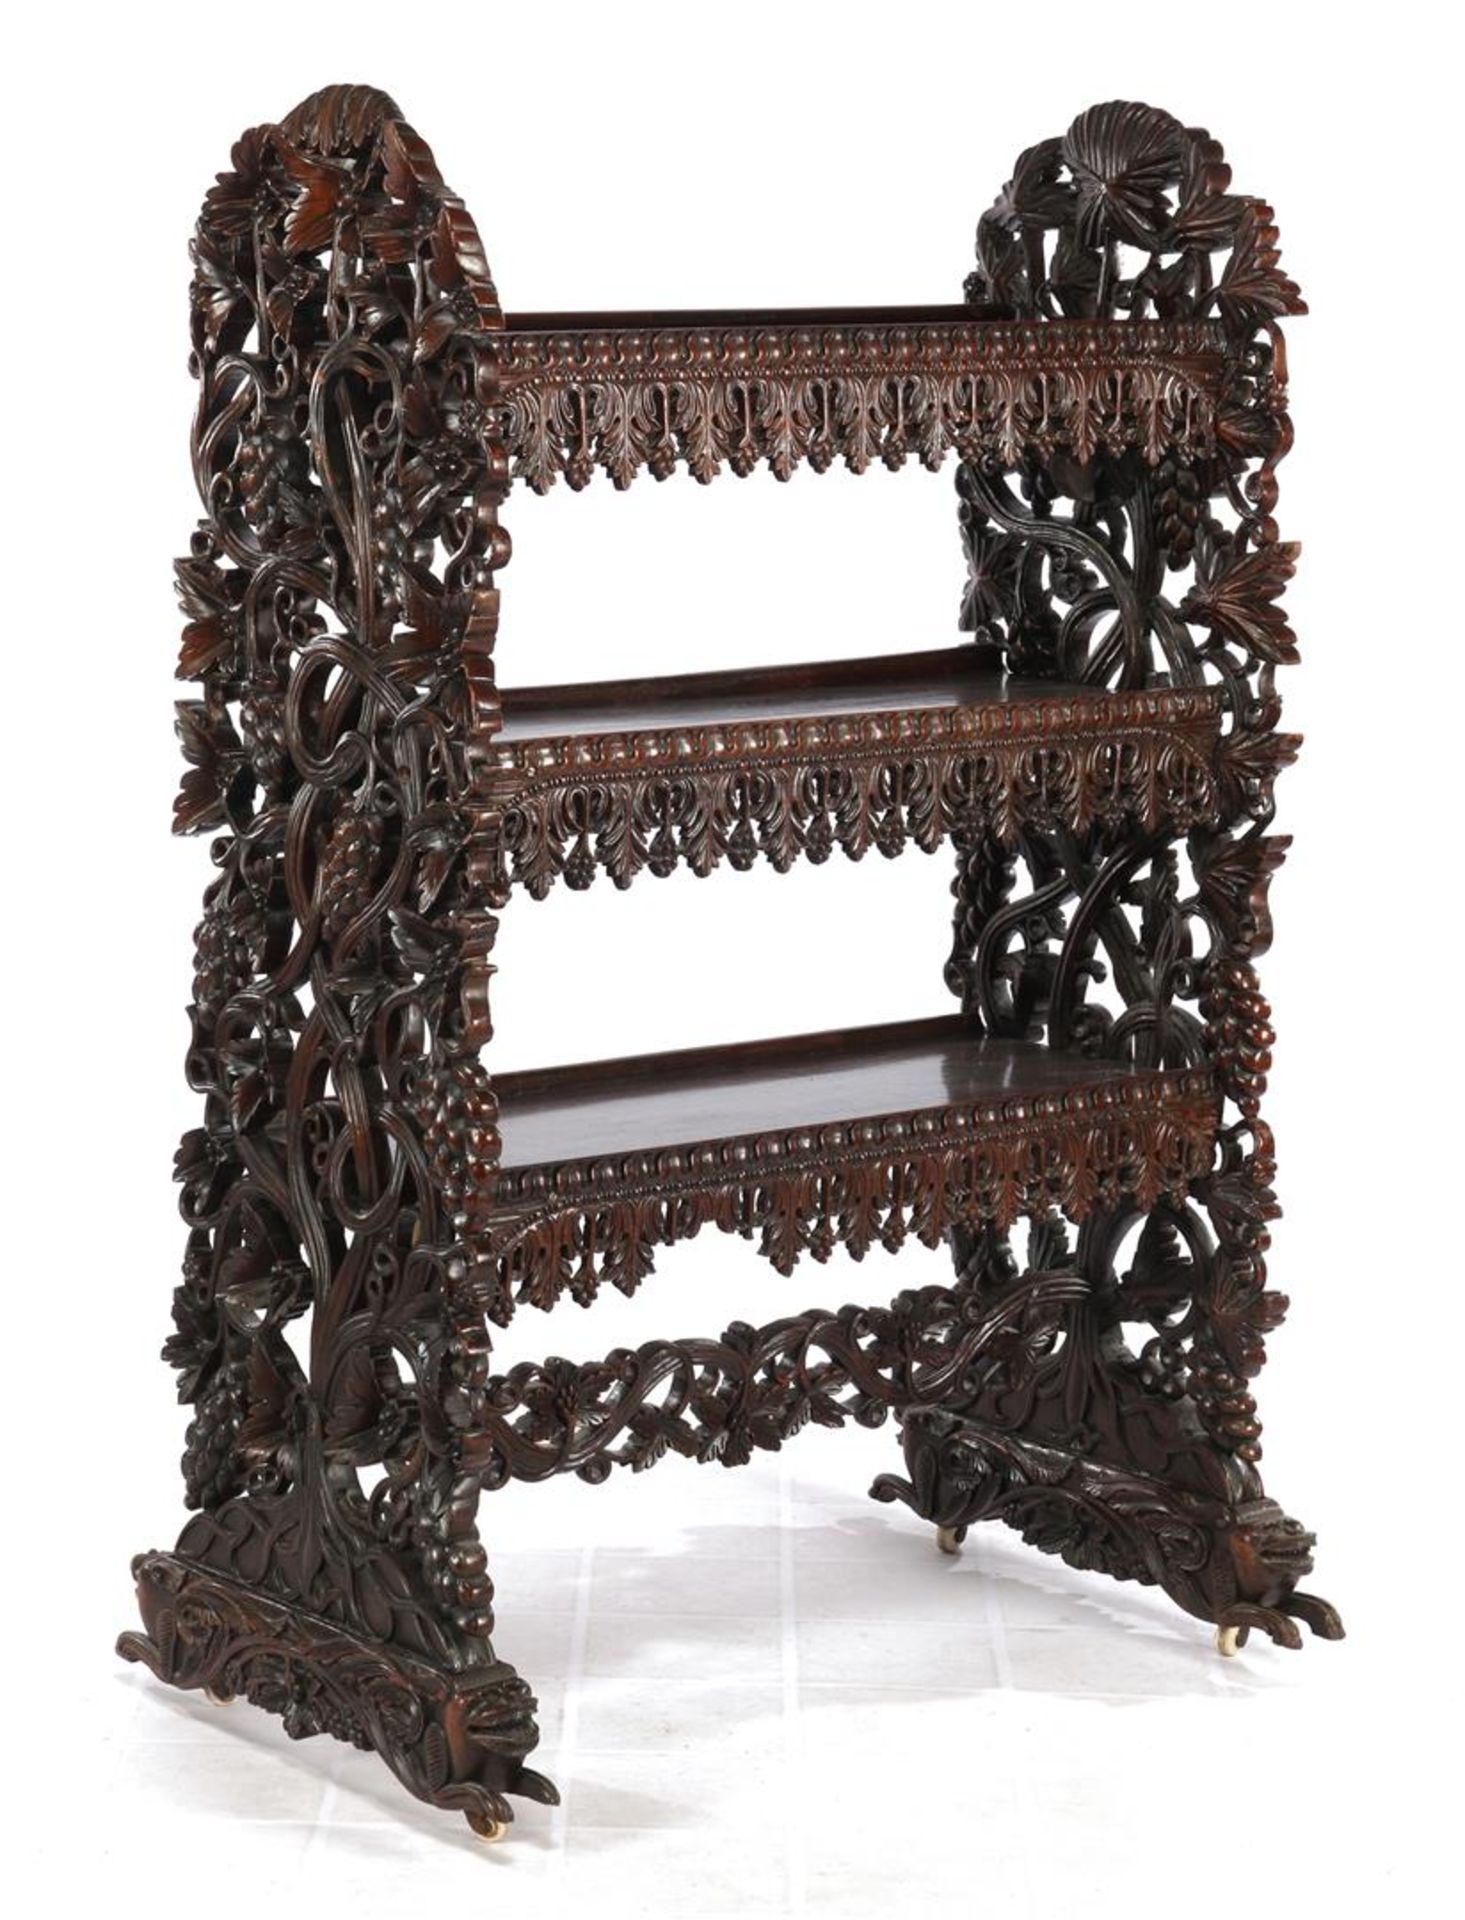 Eastern rosewood richly carved 3-shelf etagere with vines, leaves and 4 feline animals at the